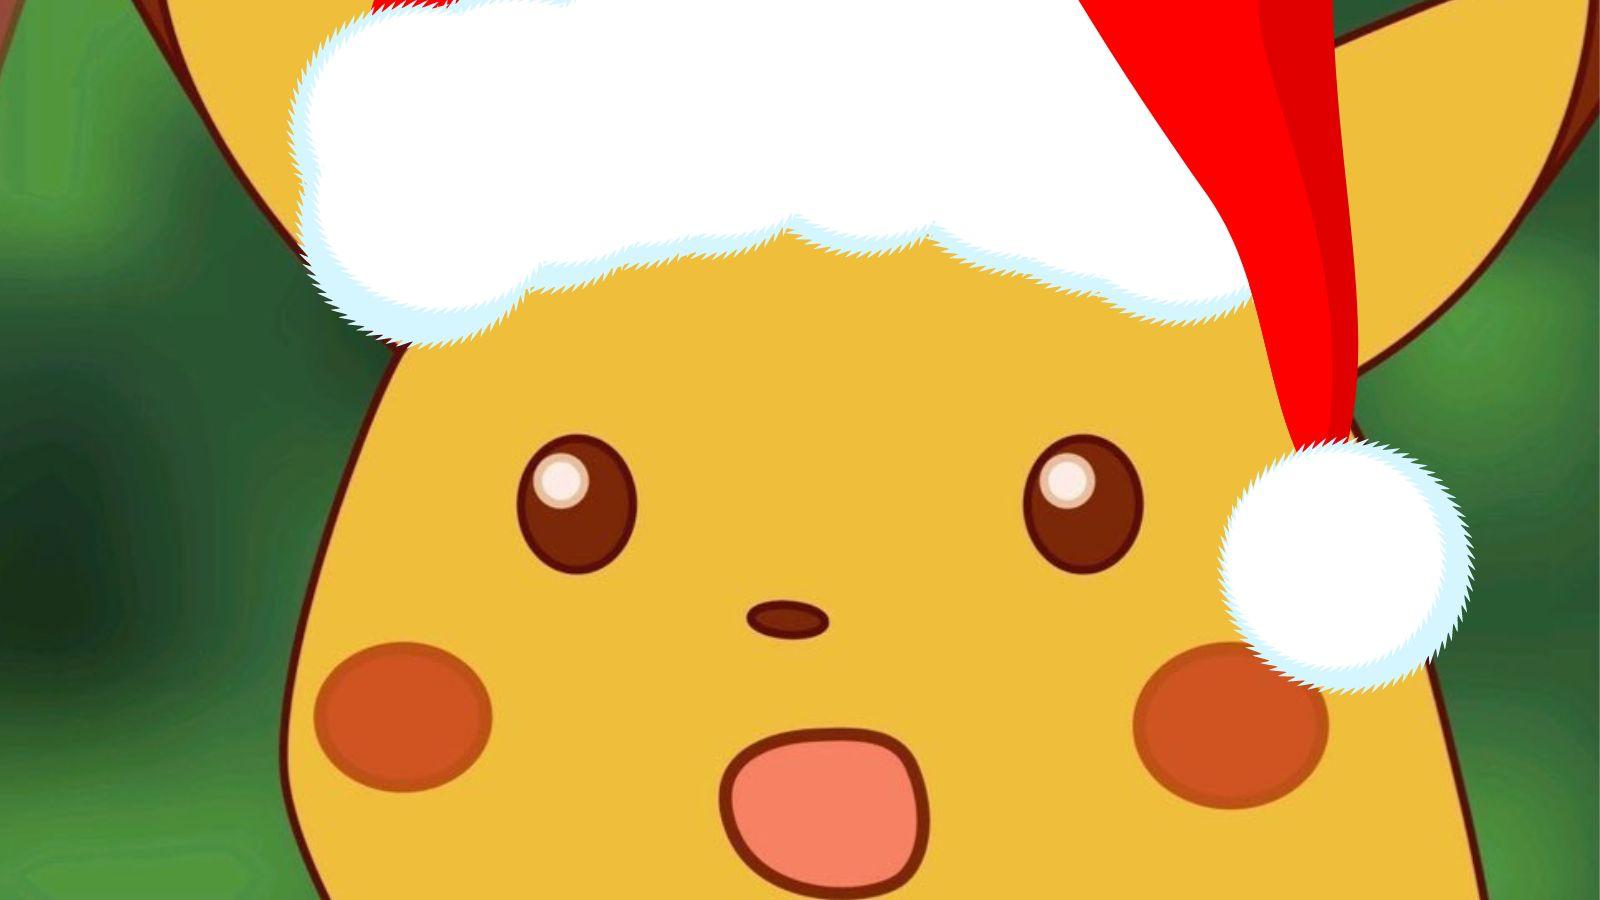 Pikachu with its mouth agape wearing a Santa hat